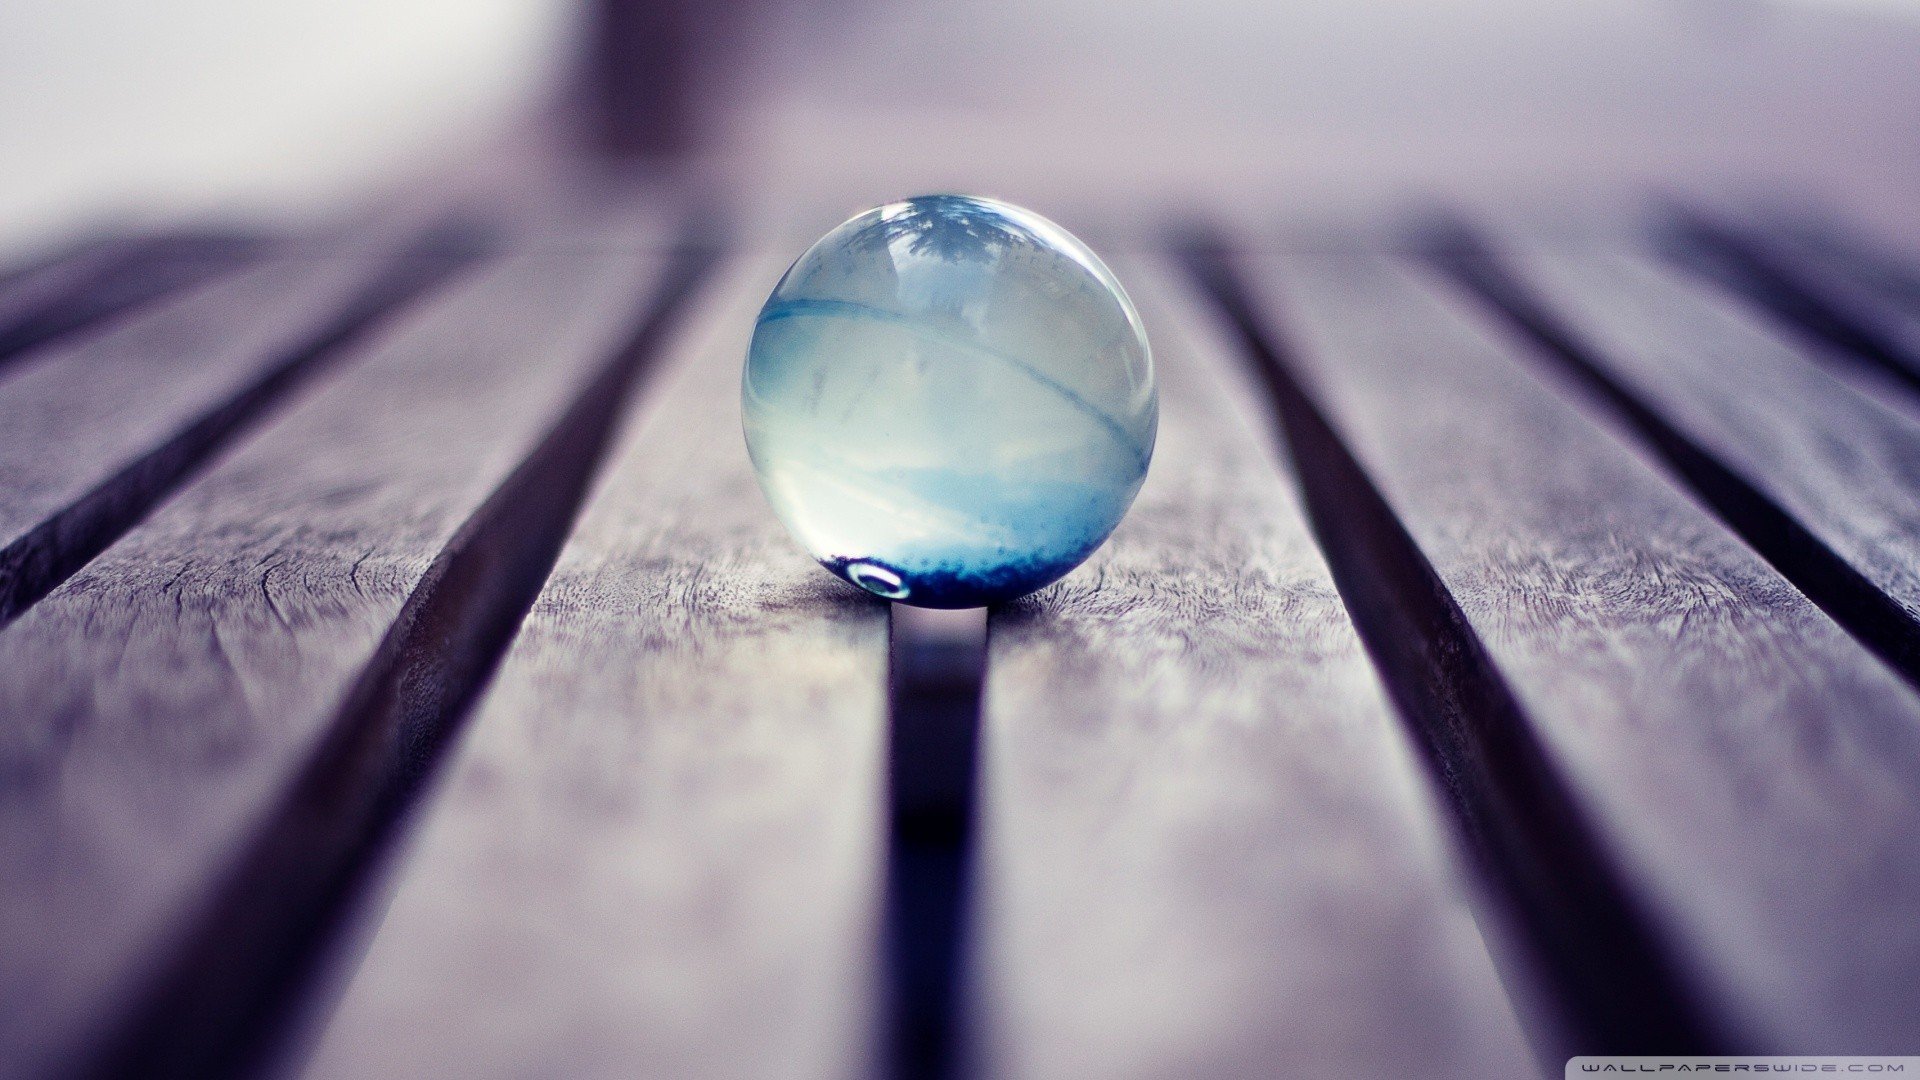 photography, Macro, Marble, Wood, Wooden surface, Translucent, Blue